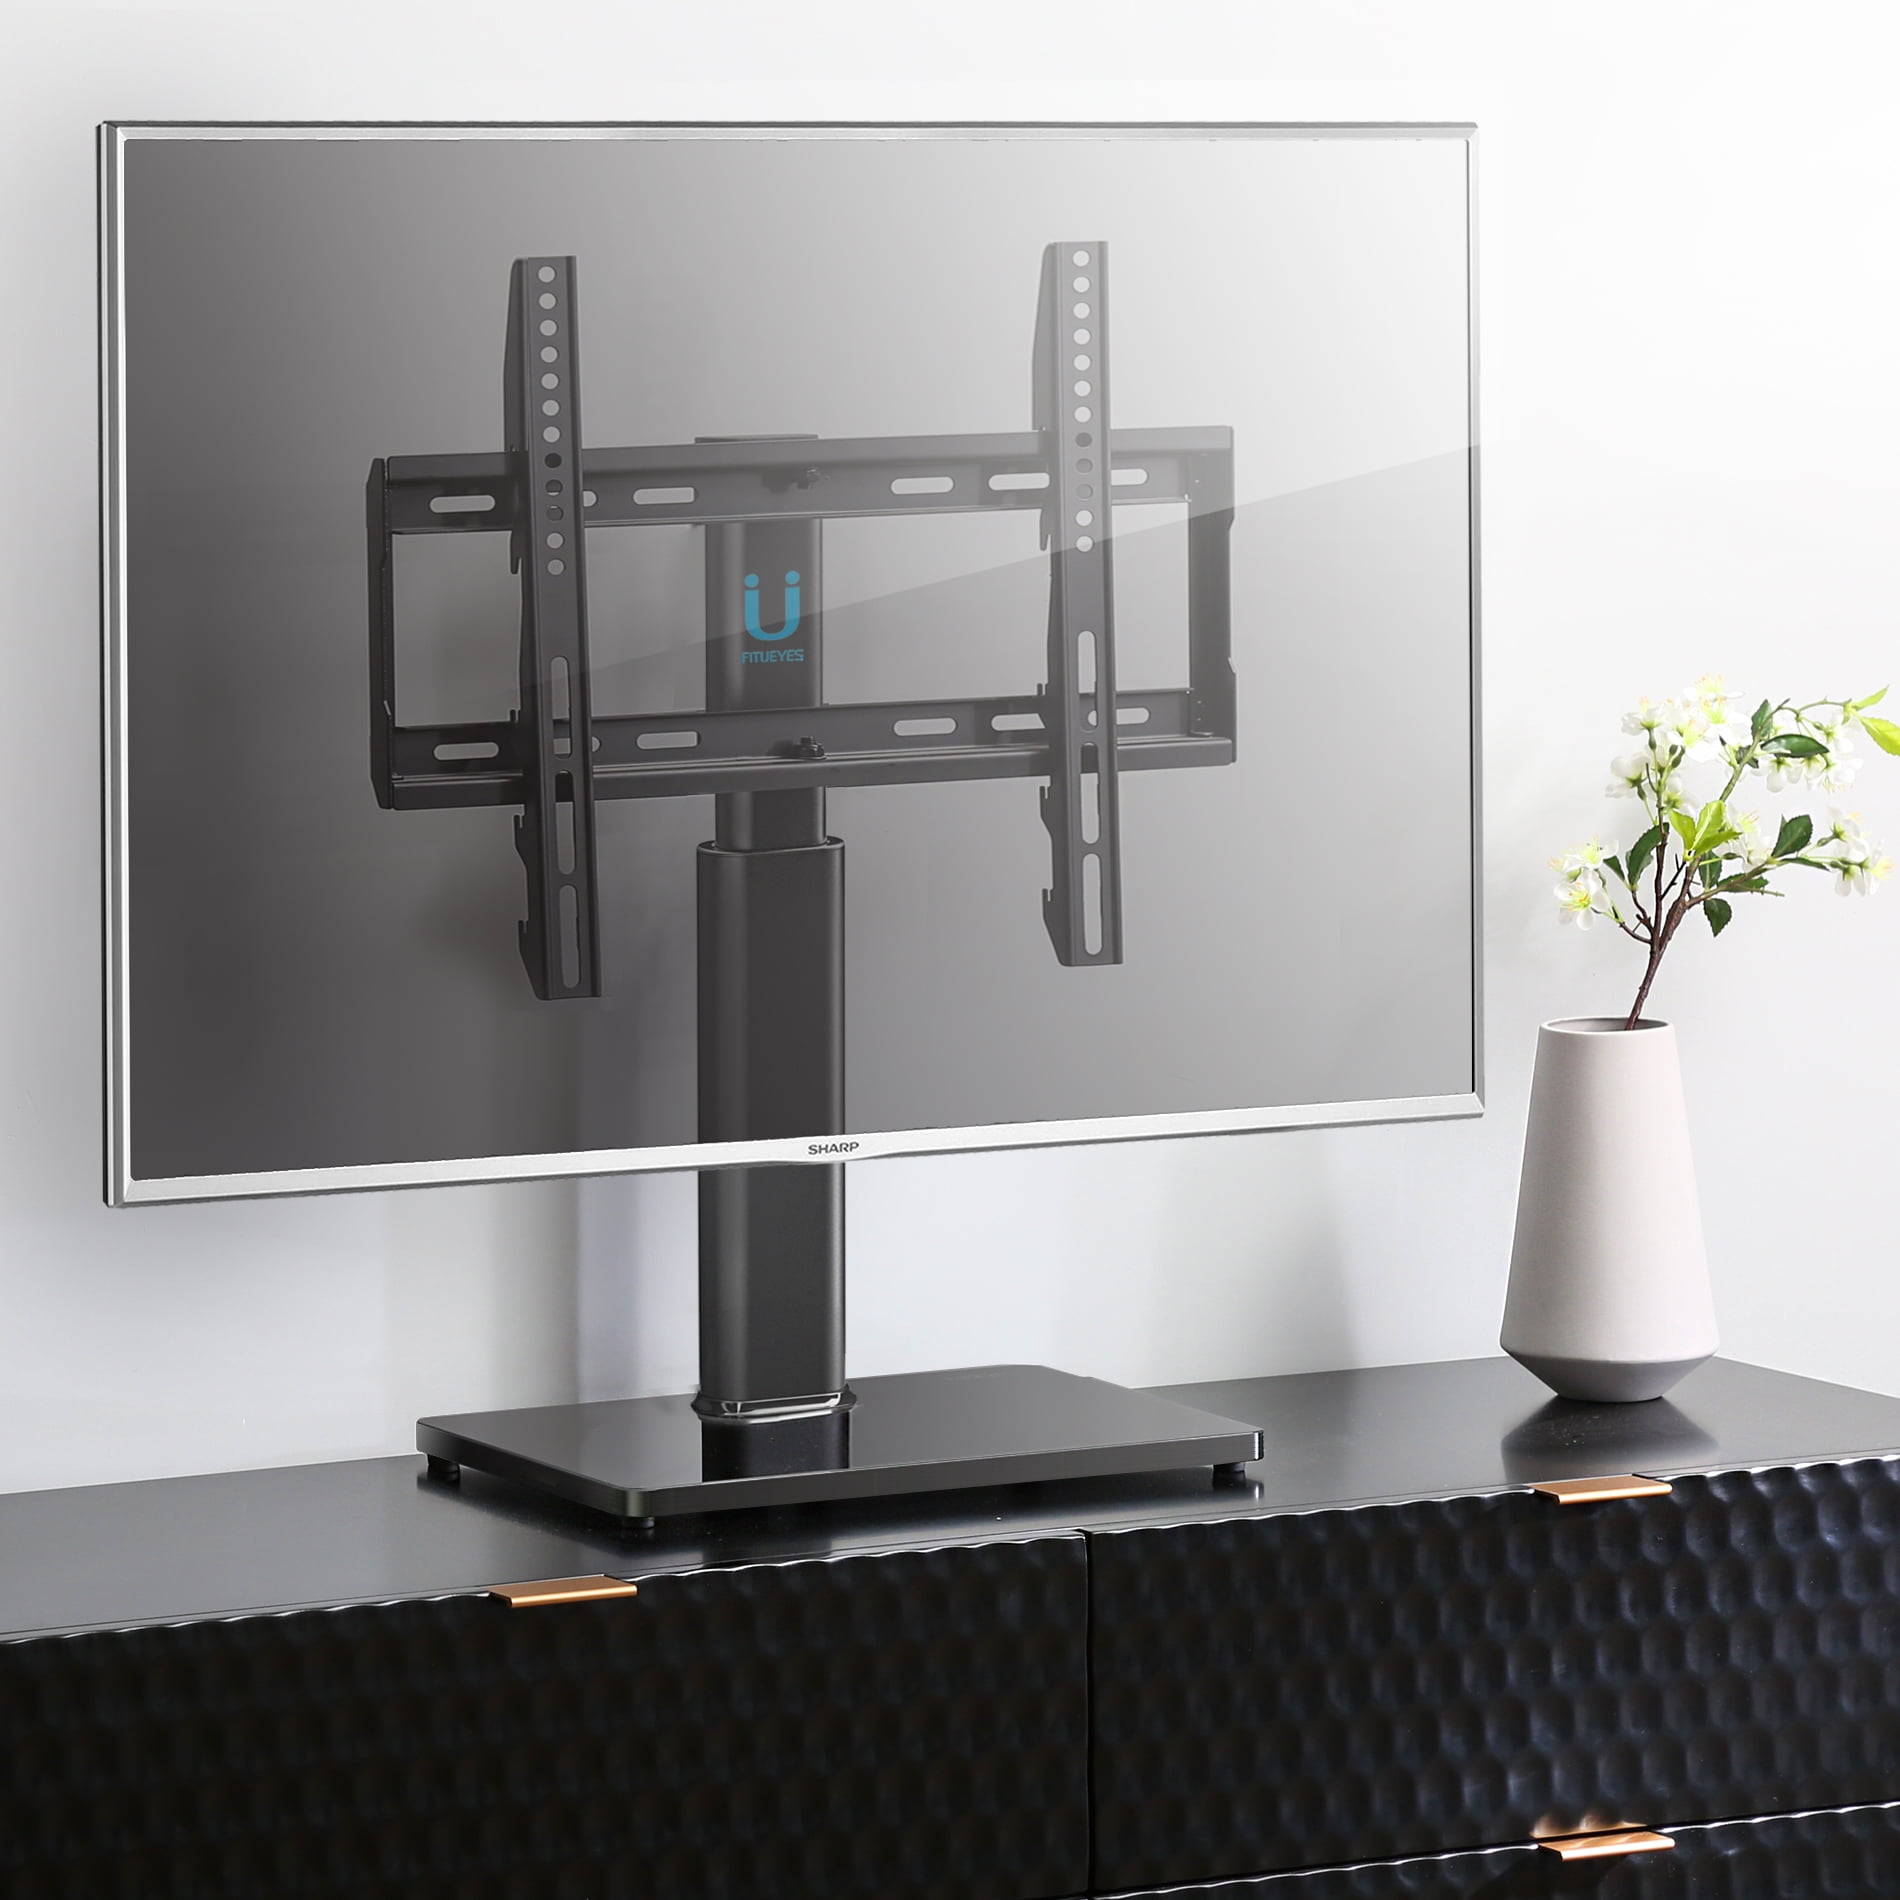 How to secure flat screen tv on stand - polewheritage